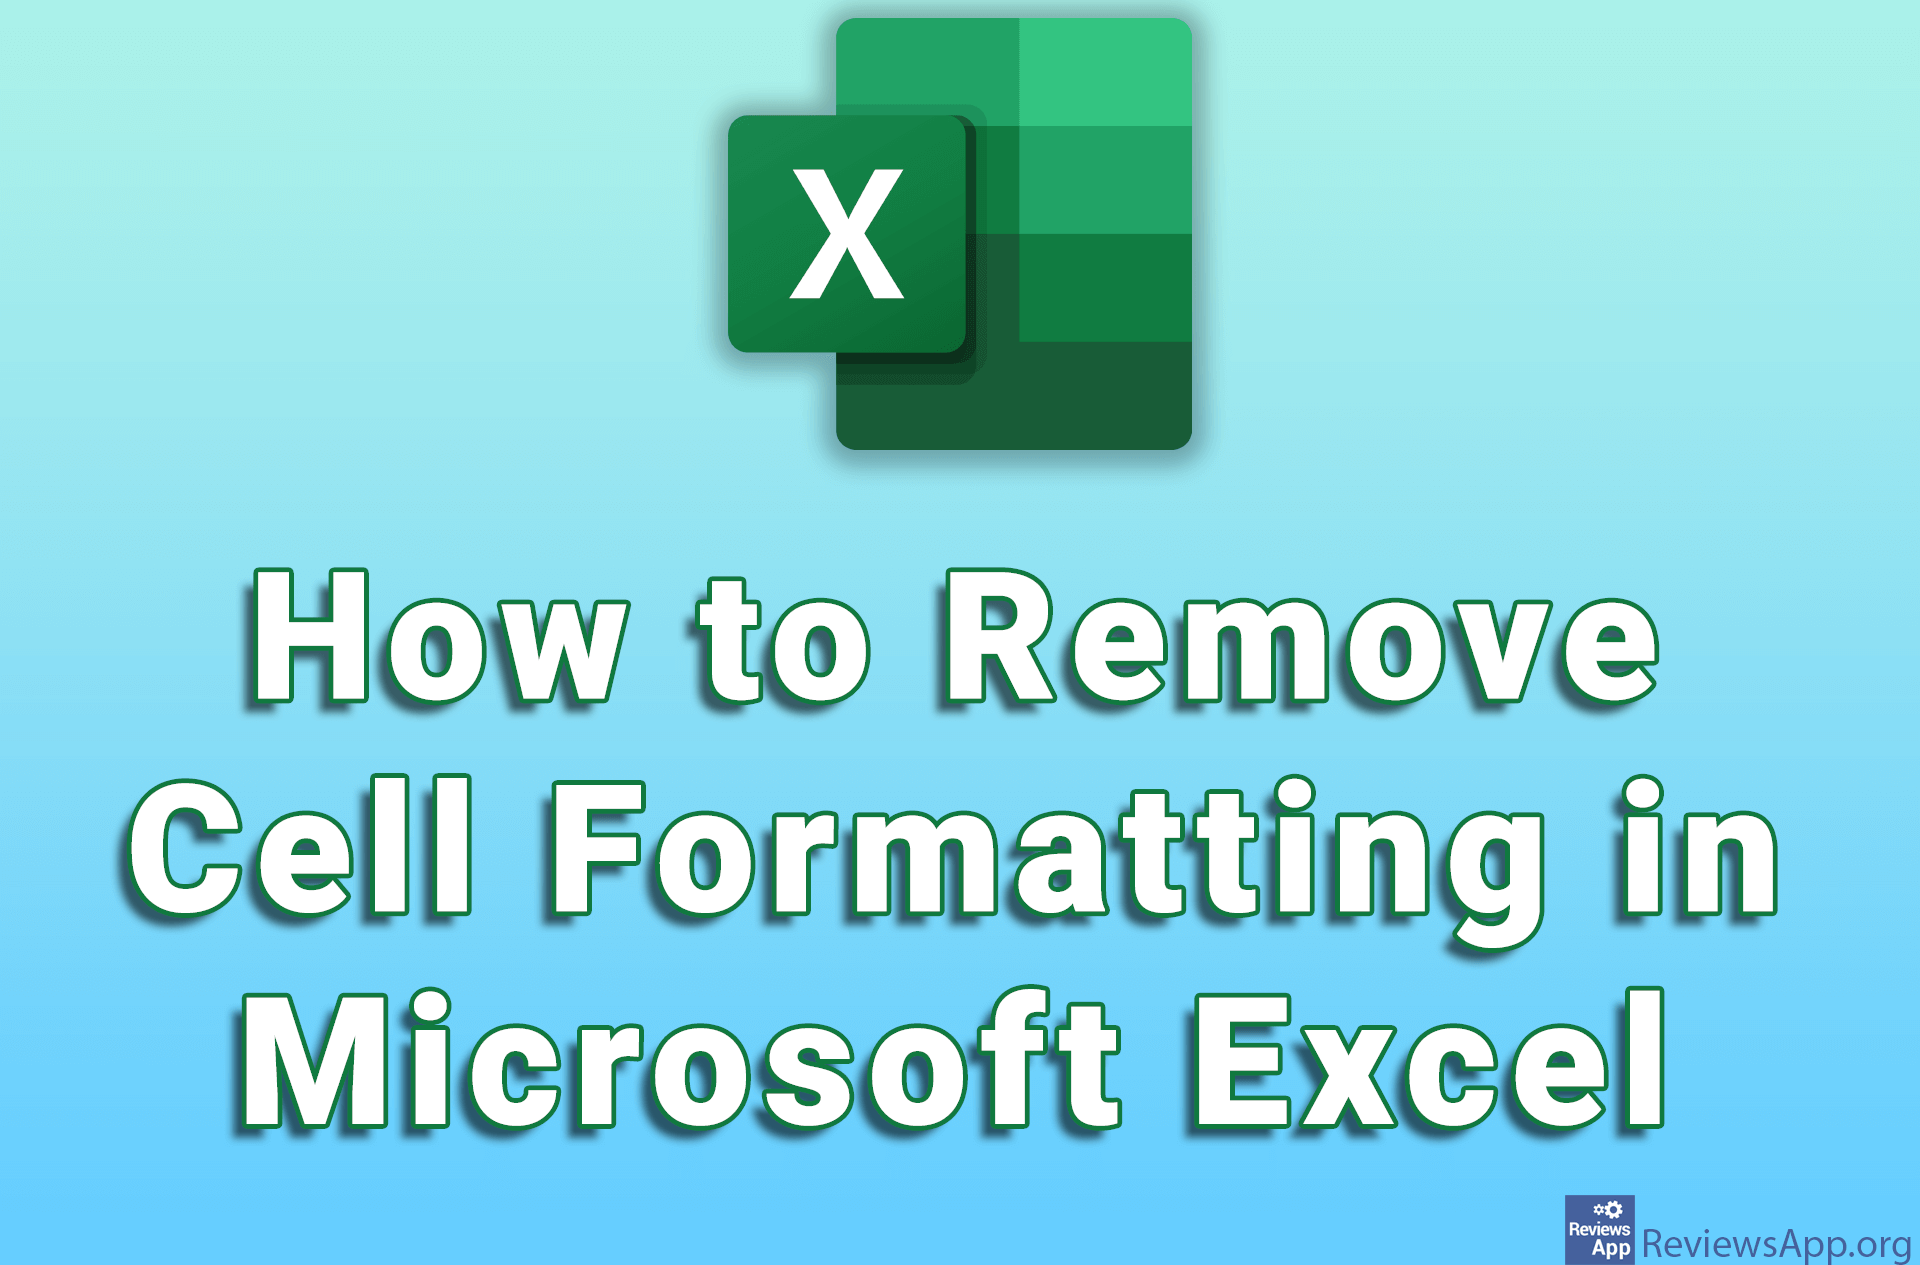 How to Remove Cell Formatting in Microsoft Excel